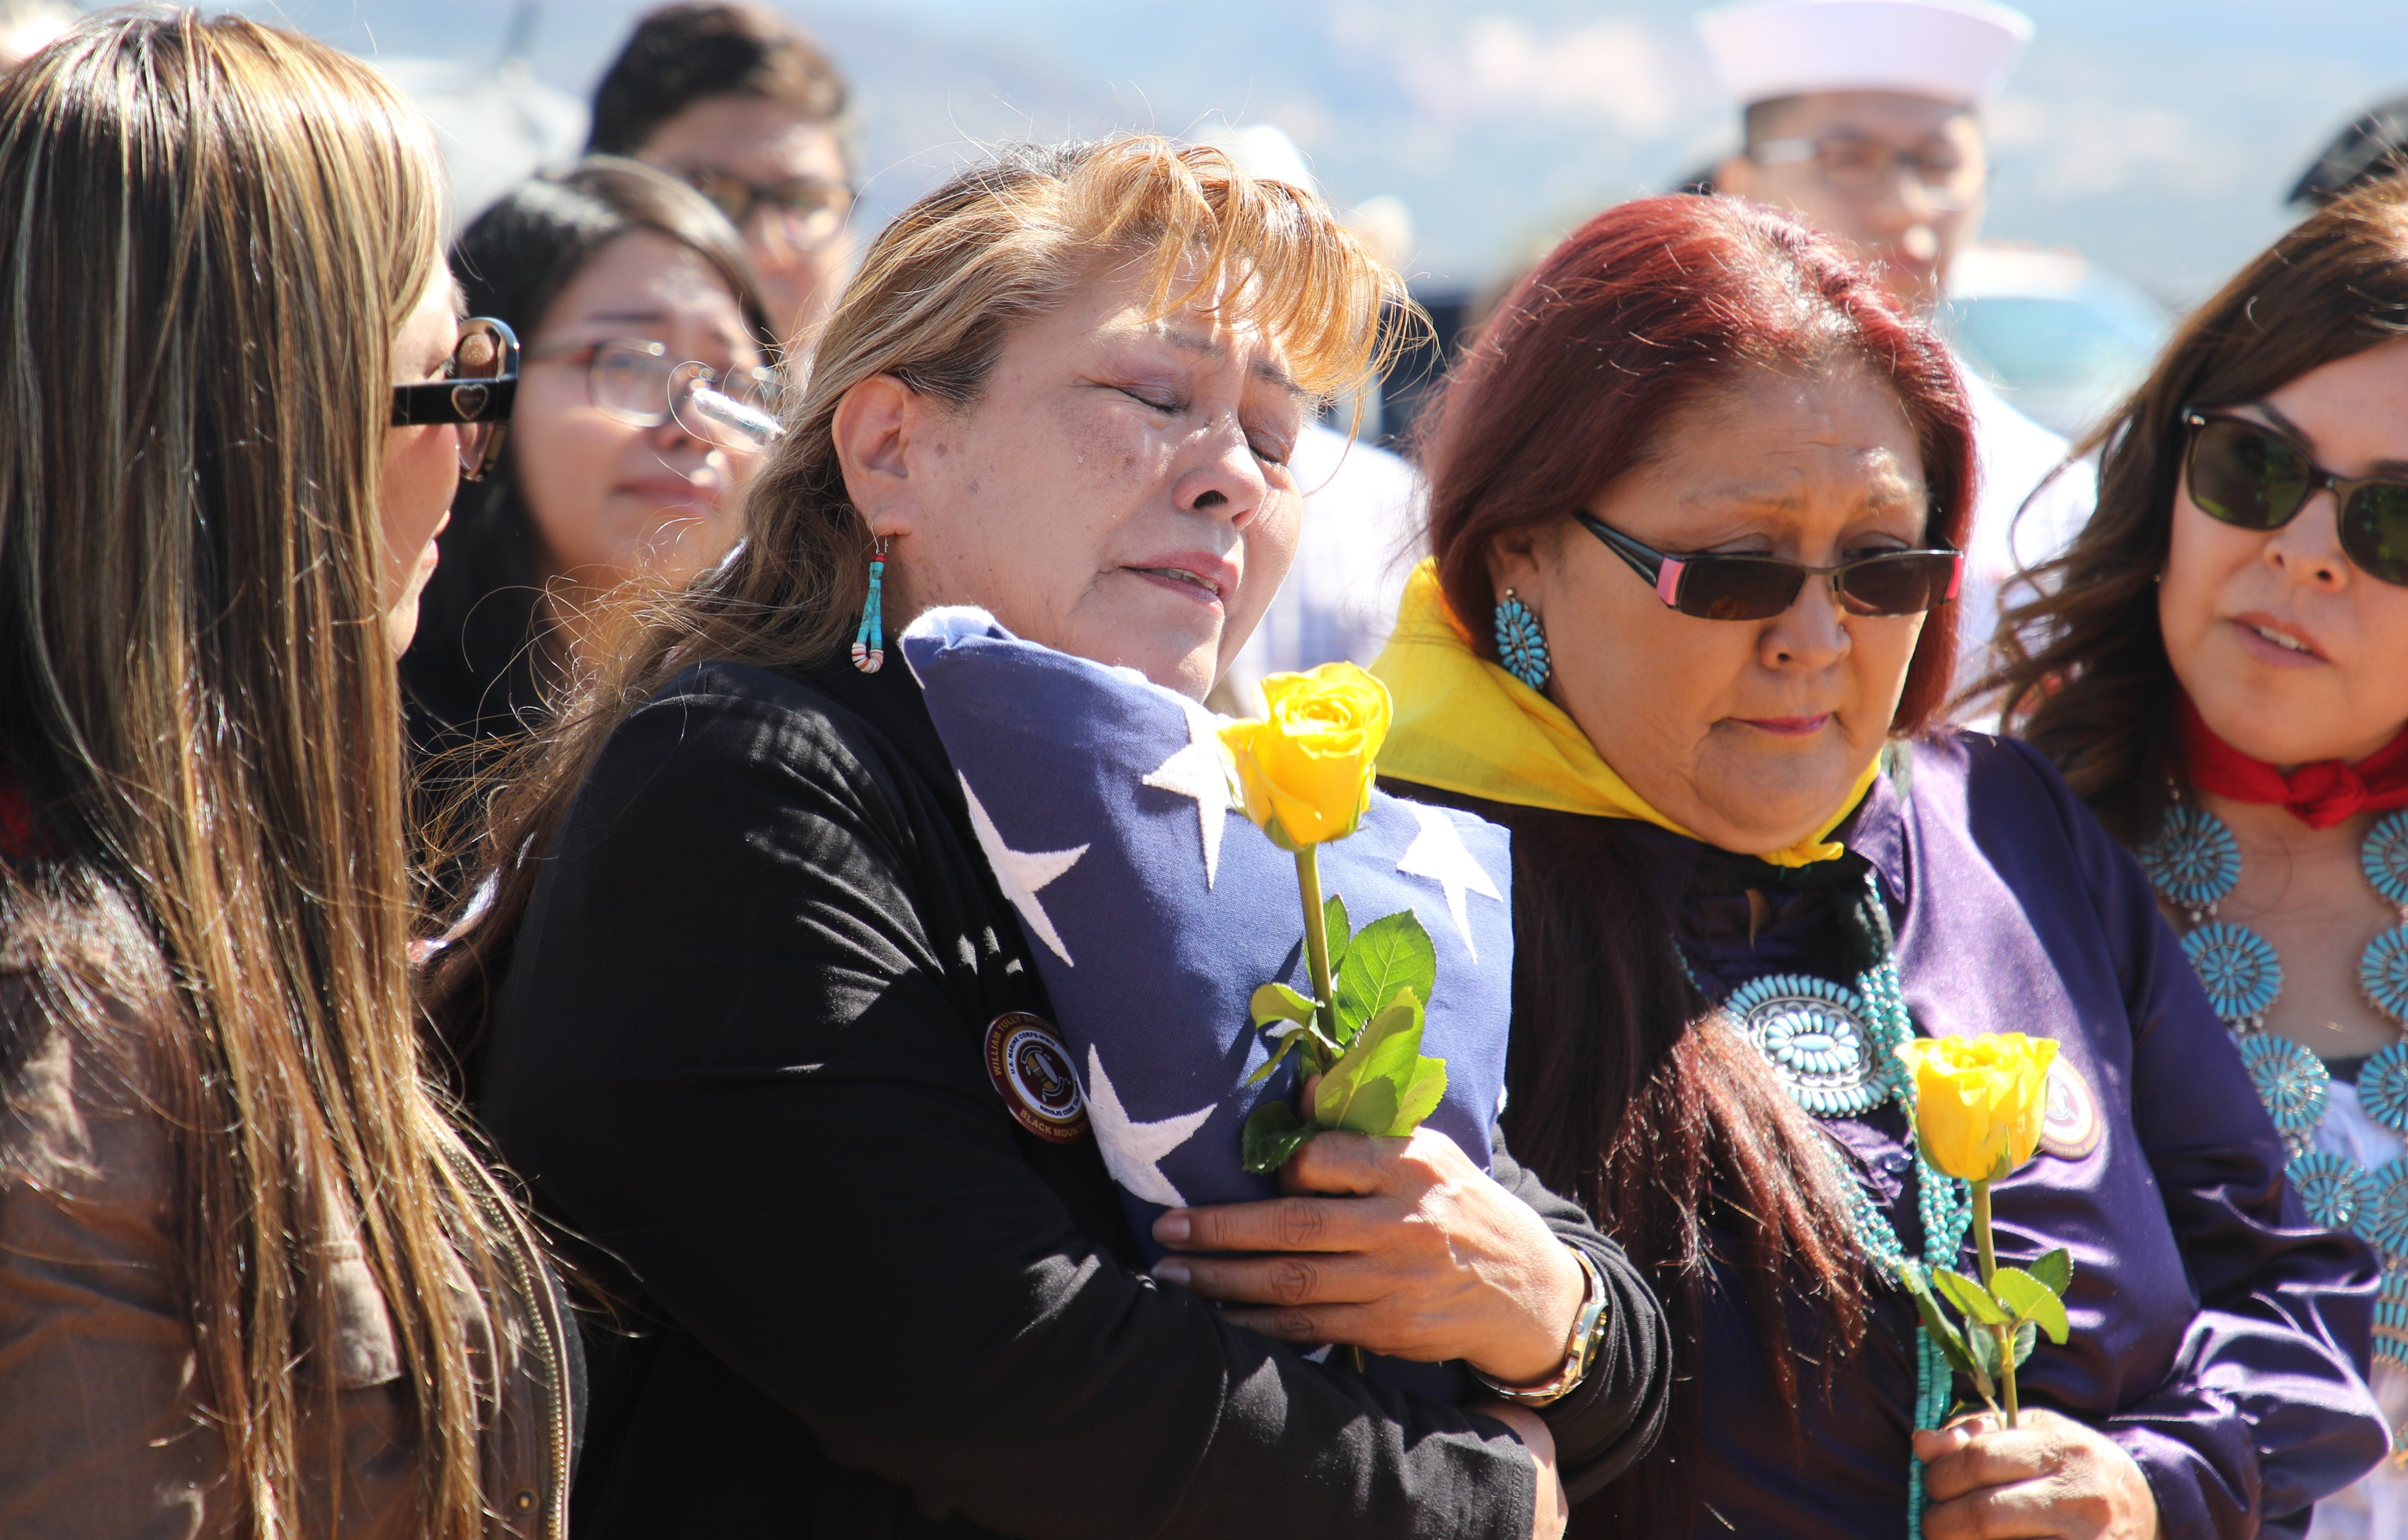 Vee F. Browne-Yellowhair embraces the burial flag for her father, Navajo Code Talker William Tully Brown, during his memorial service on June 6 at the Fort Defiance Veterans Cemetery in Fort Defiance, Ariz.